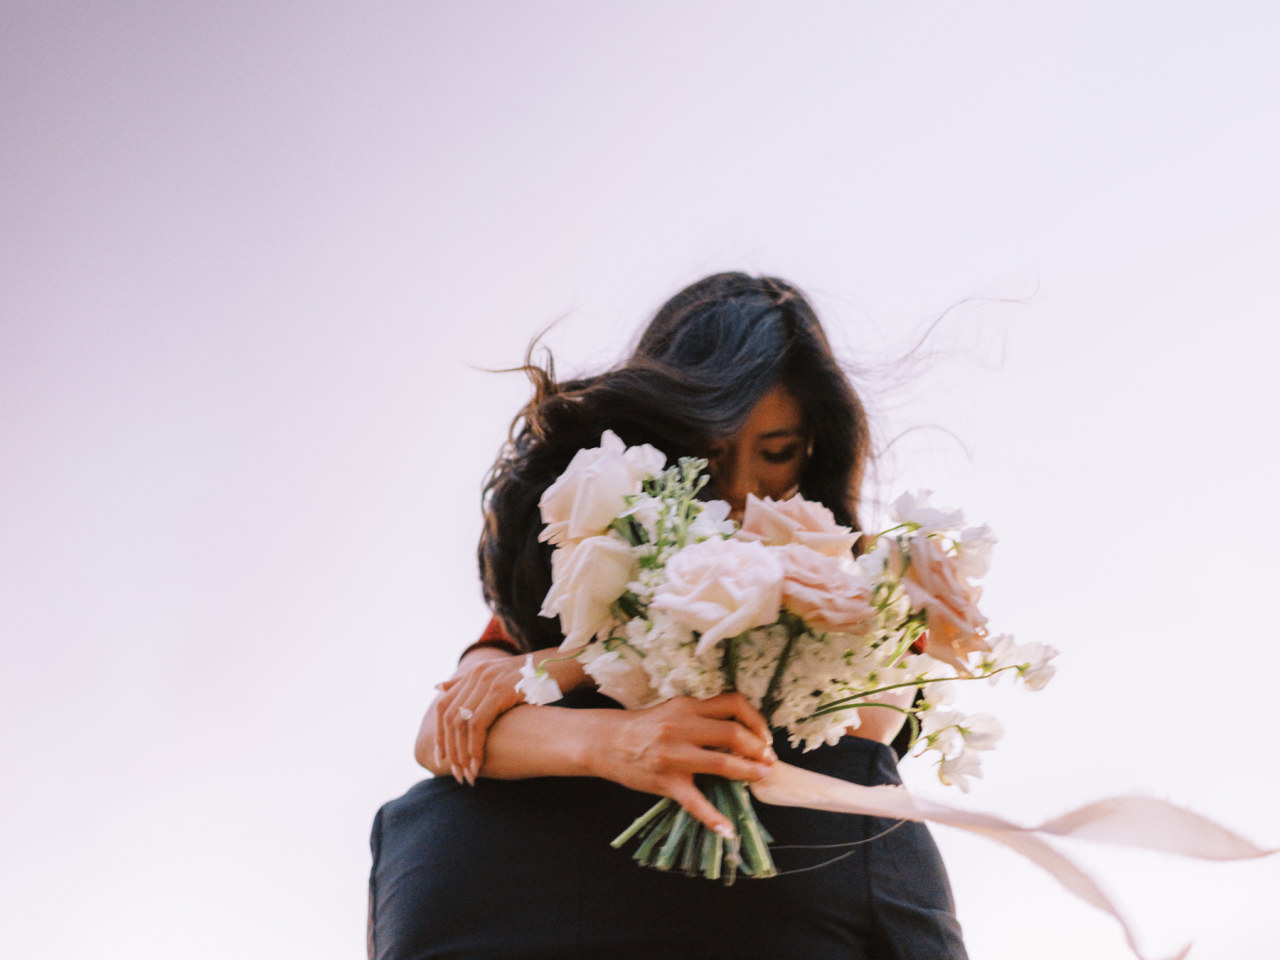 Man lifting up woman, embracing. Woman holding light pink and white flowers bouquet.